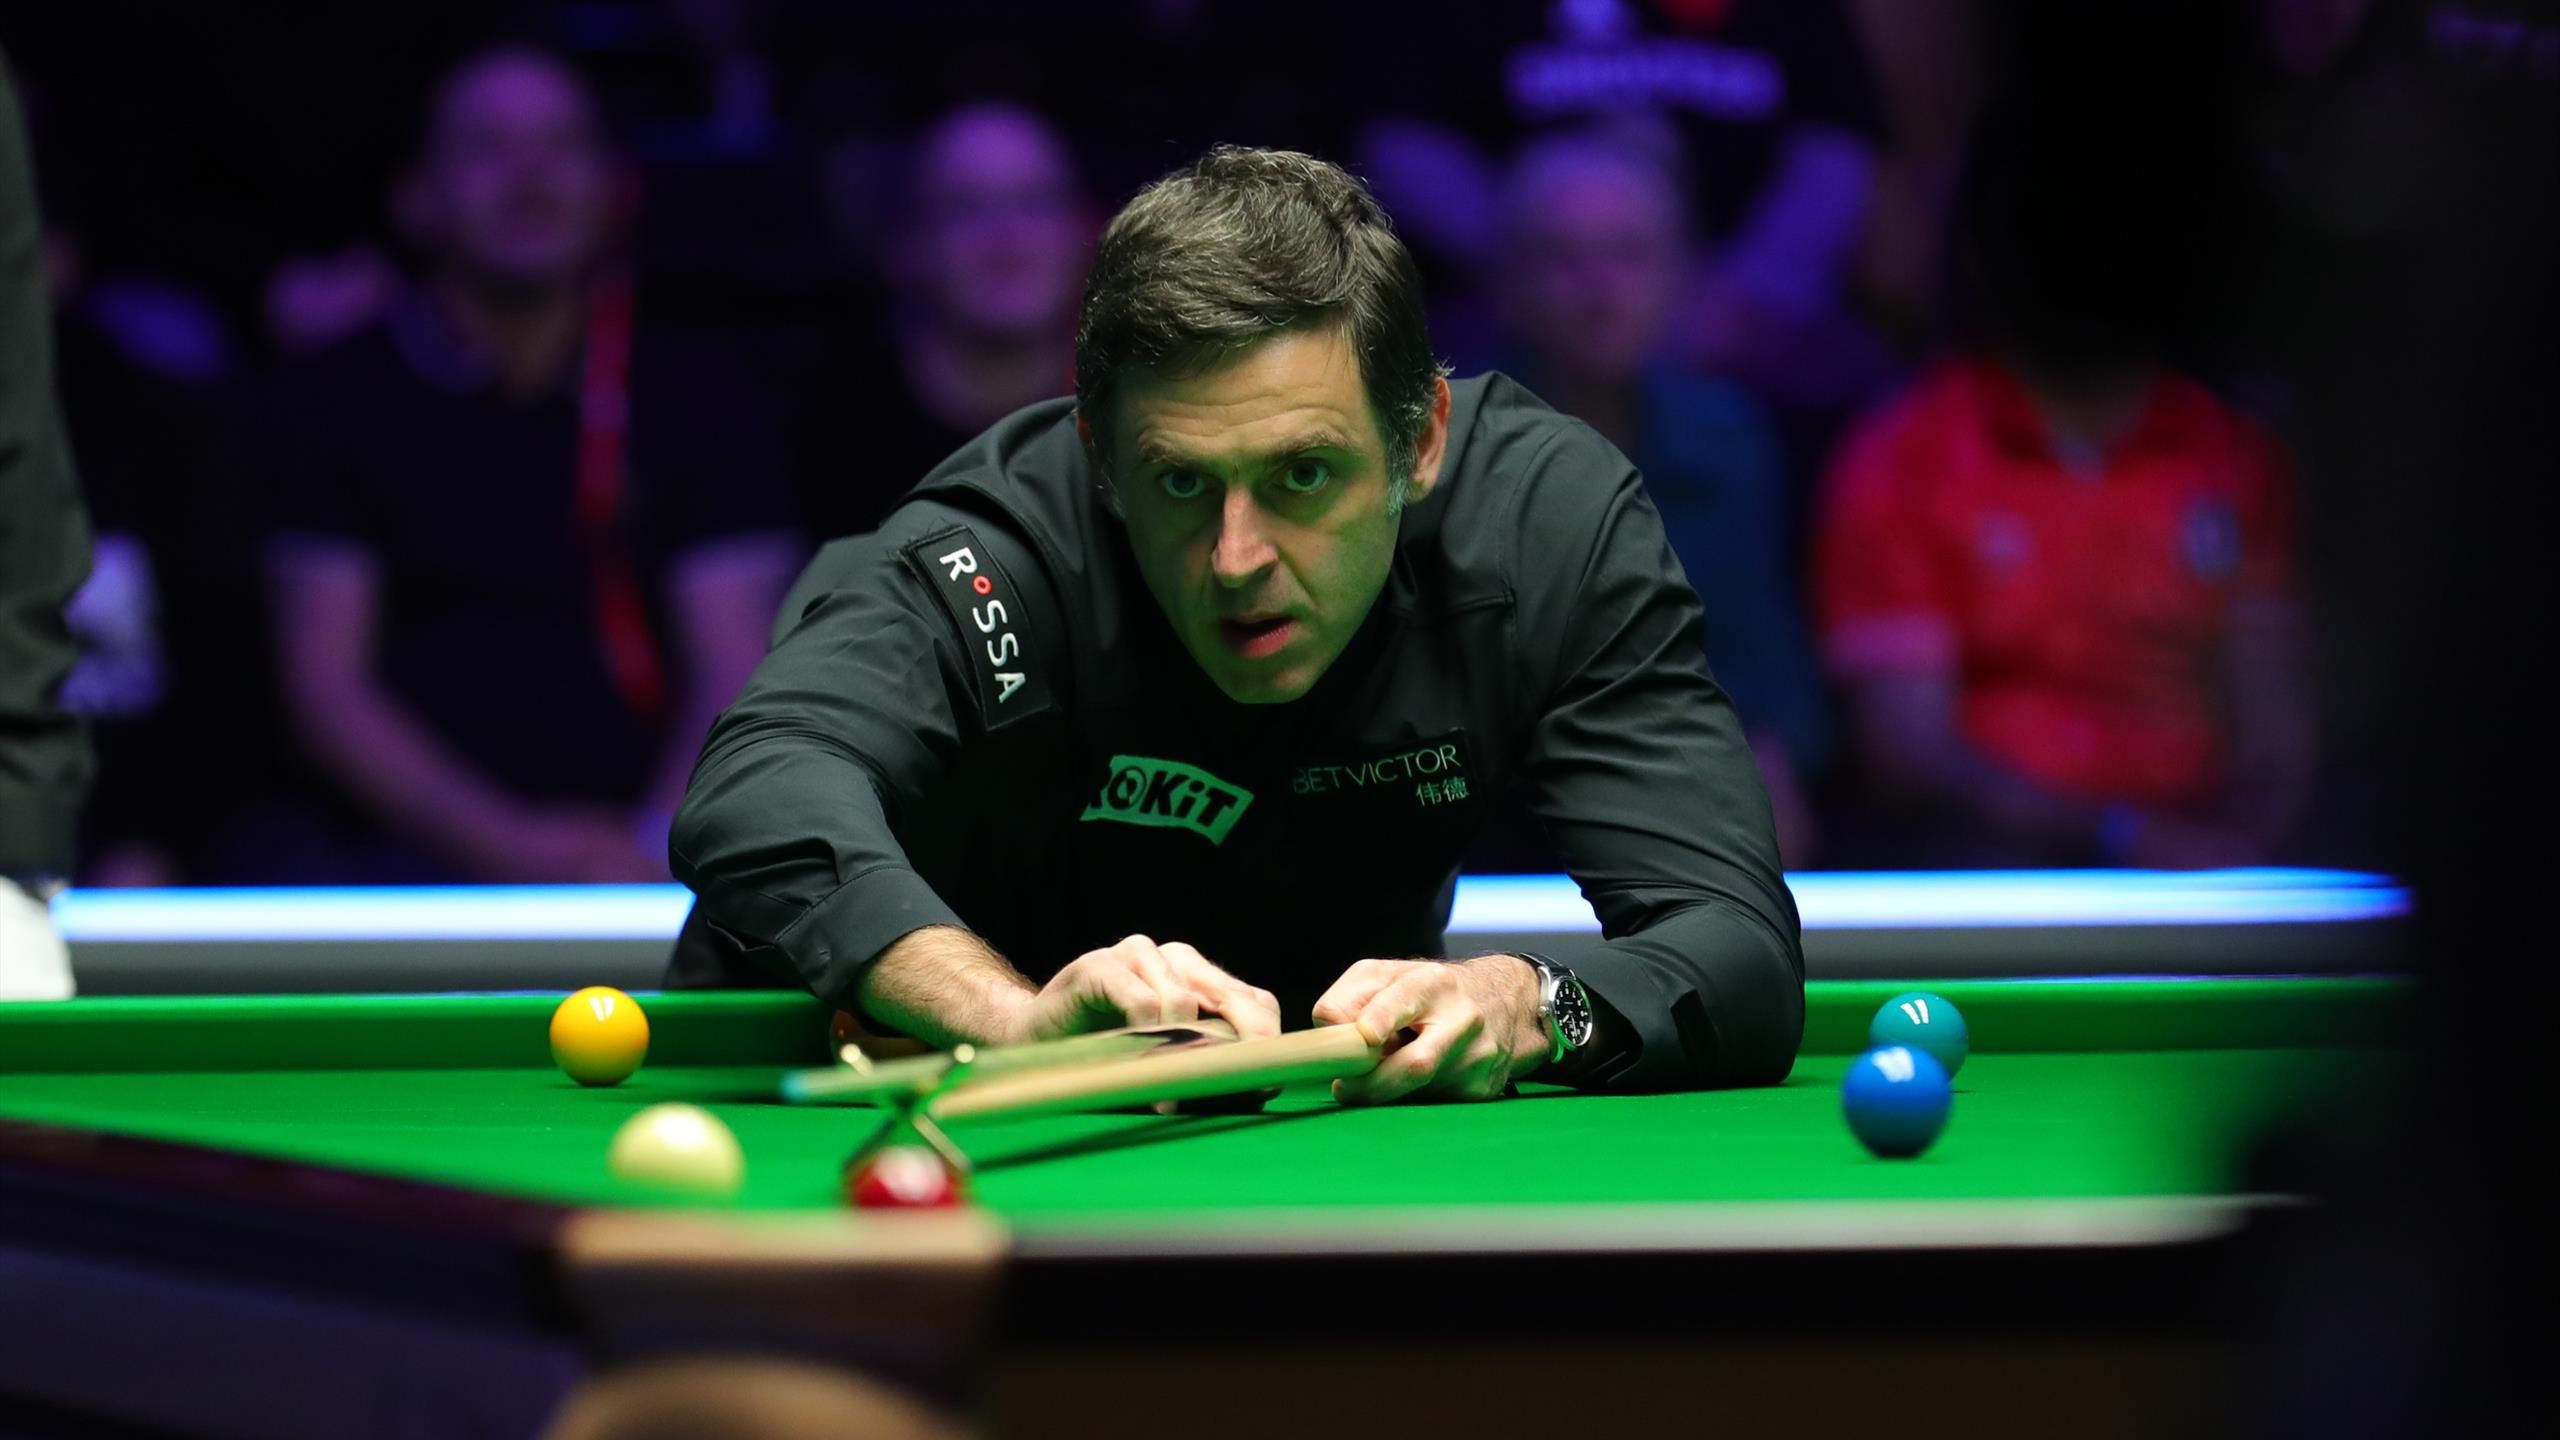 players championship snooker 2022 live stream